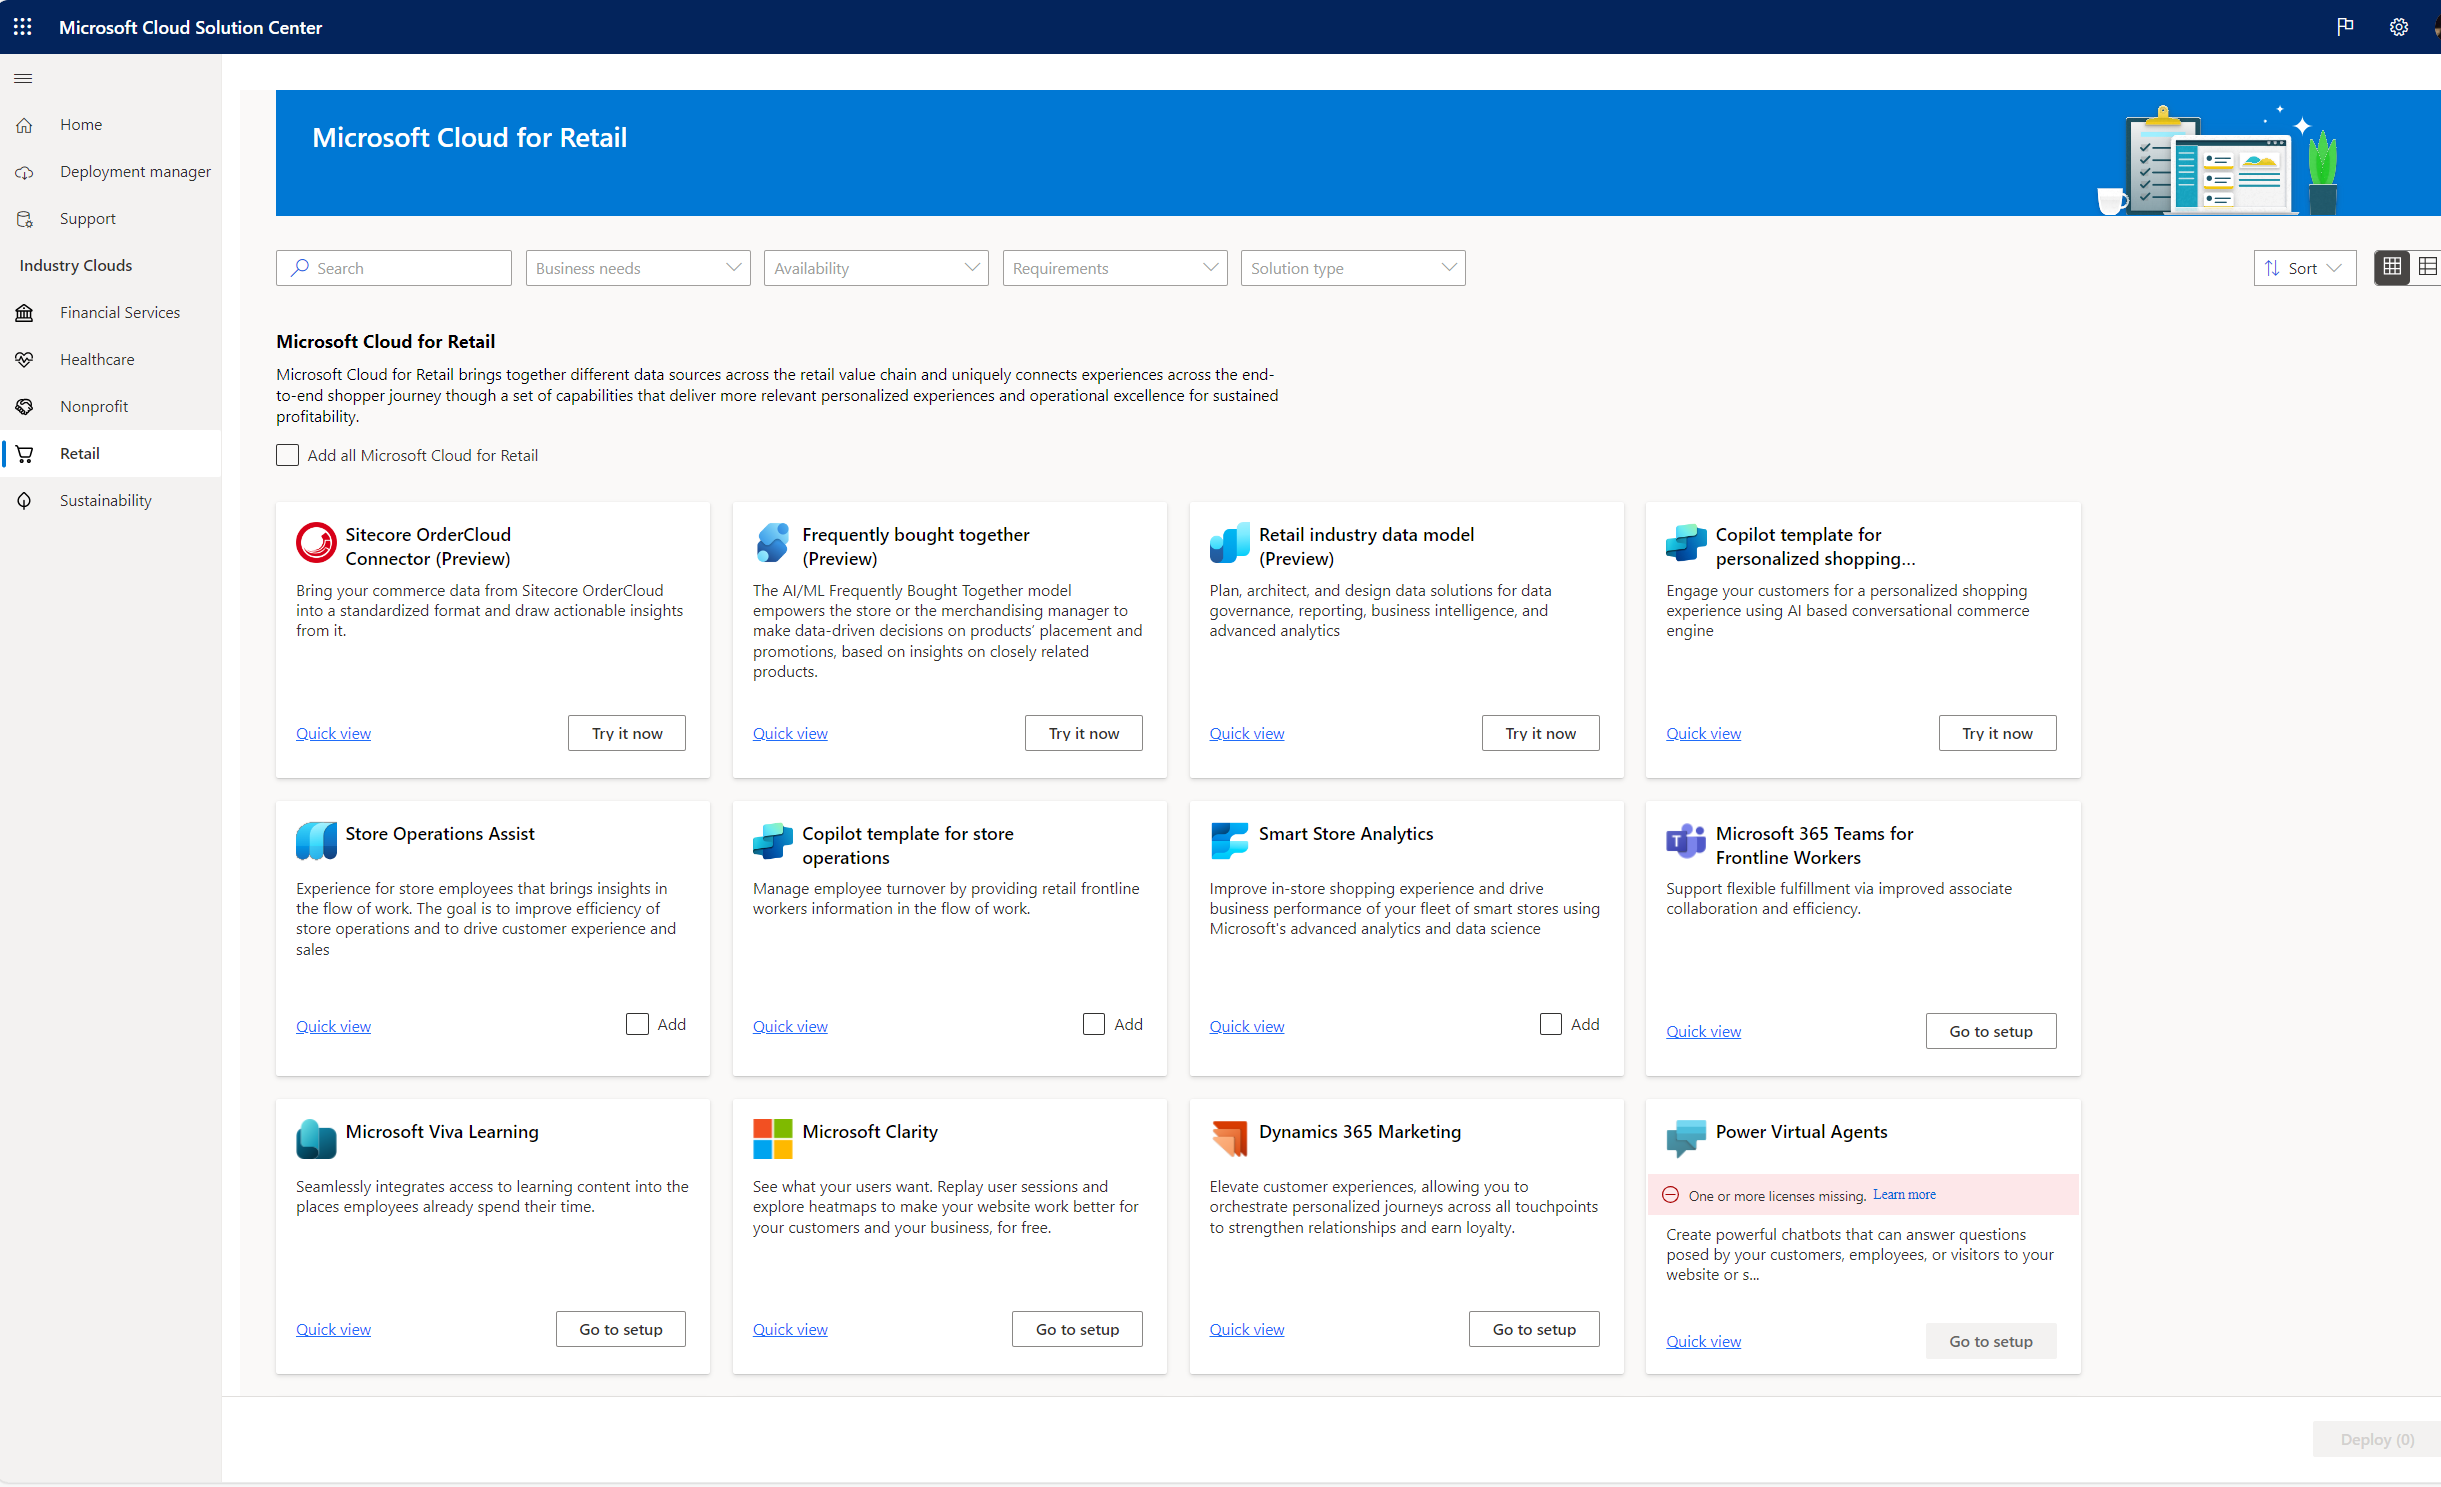 Screenshot of Microsoft Cloud Solution Center, showing capabilities of Microsoft Cloud for Retail.